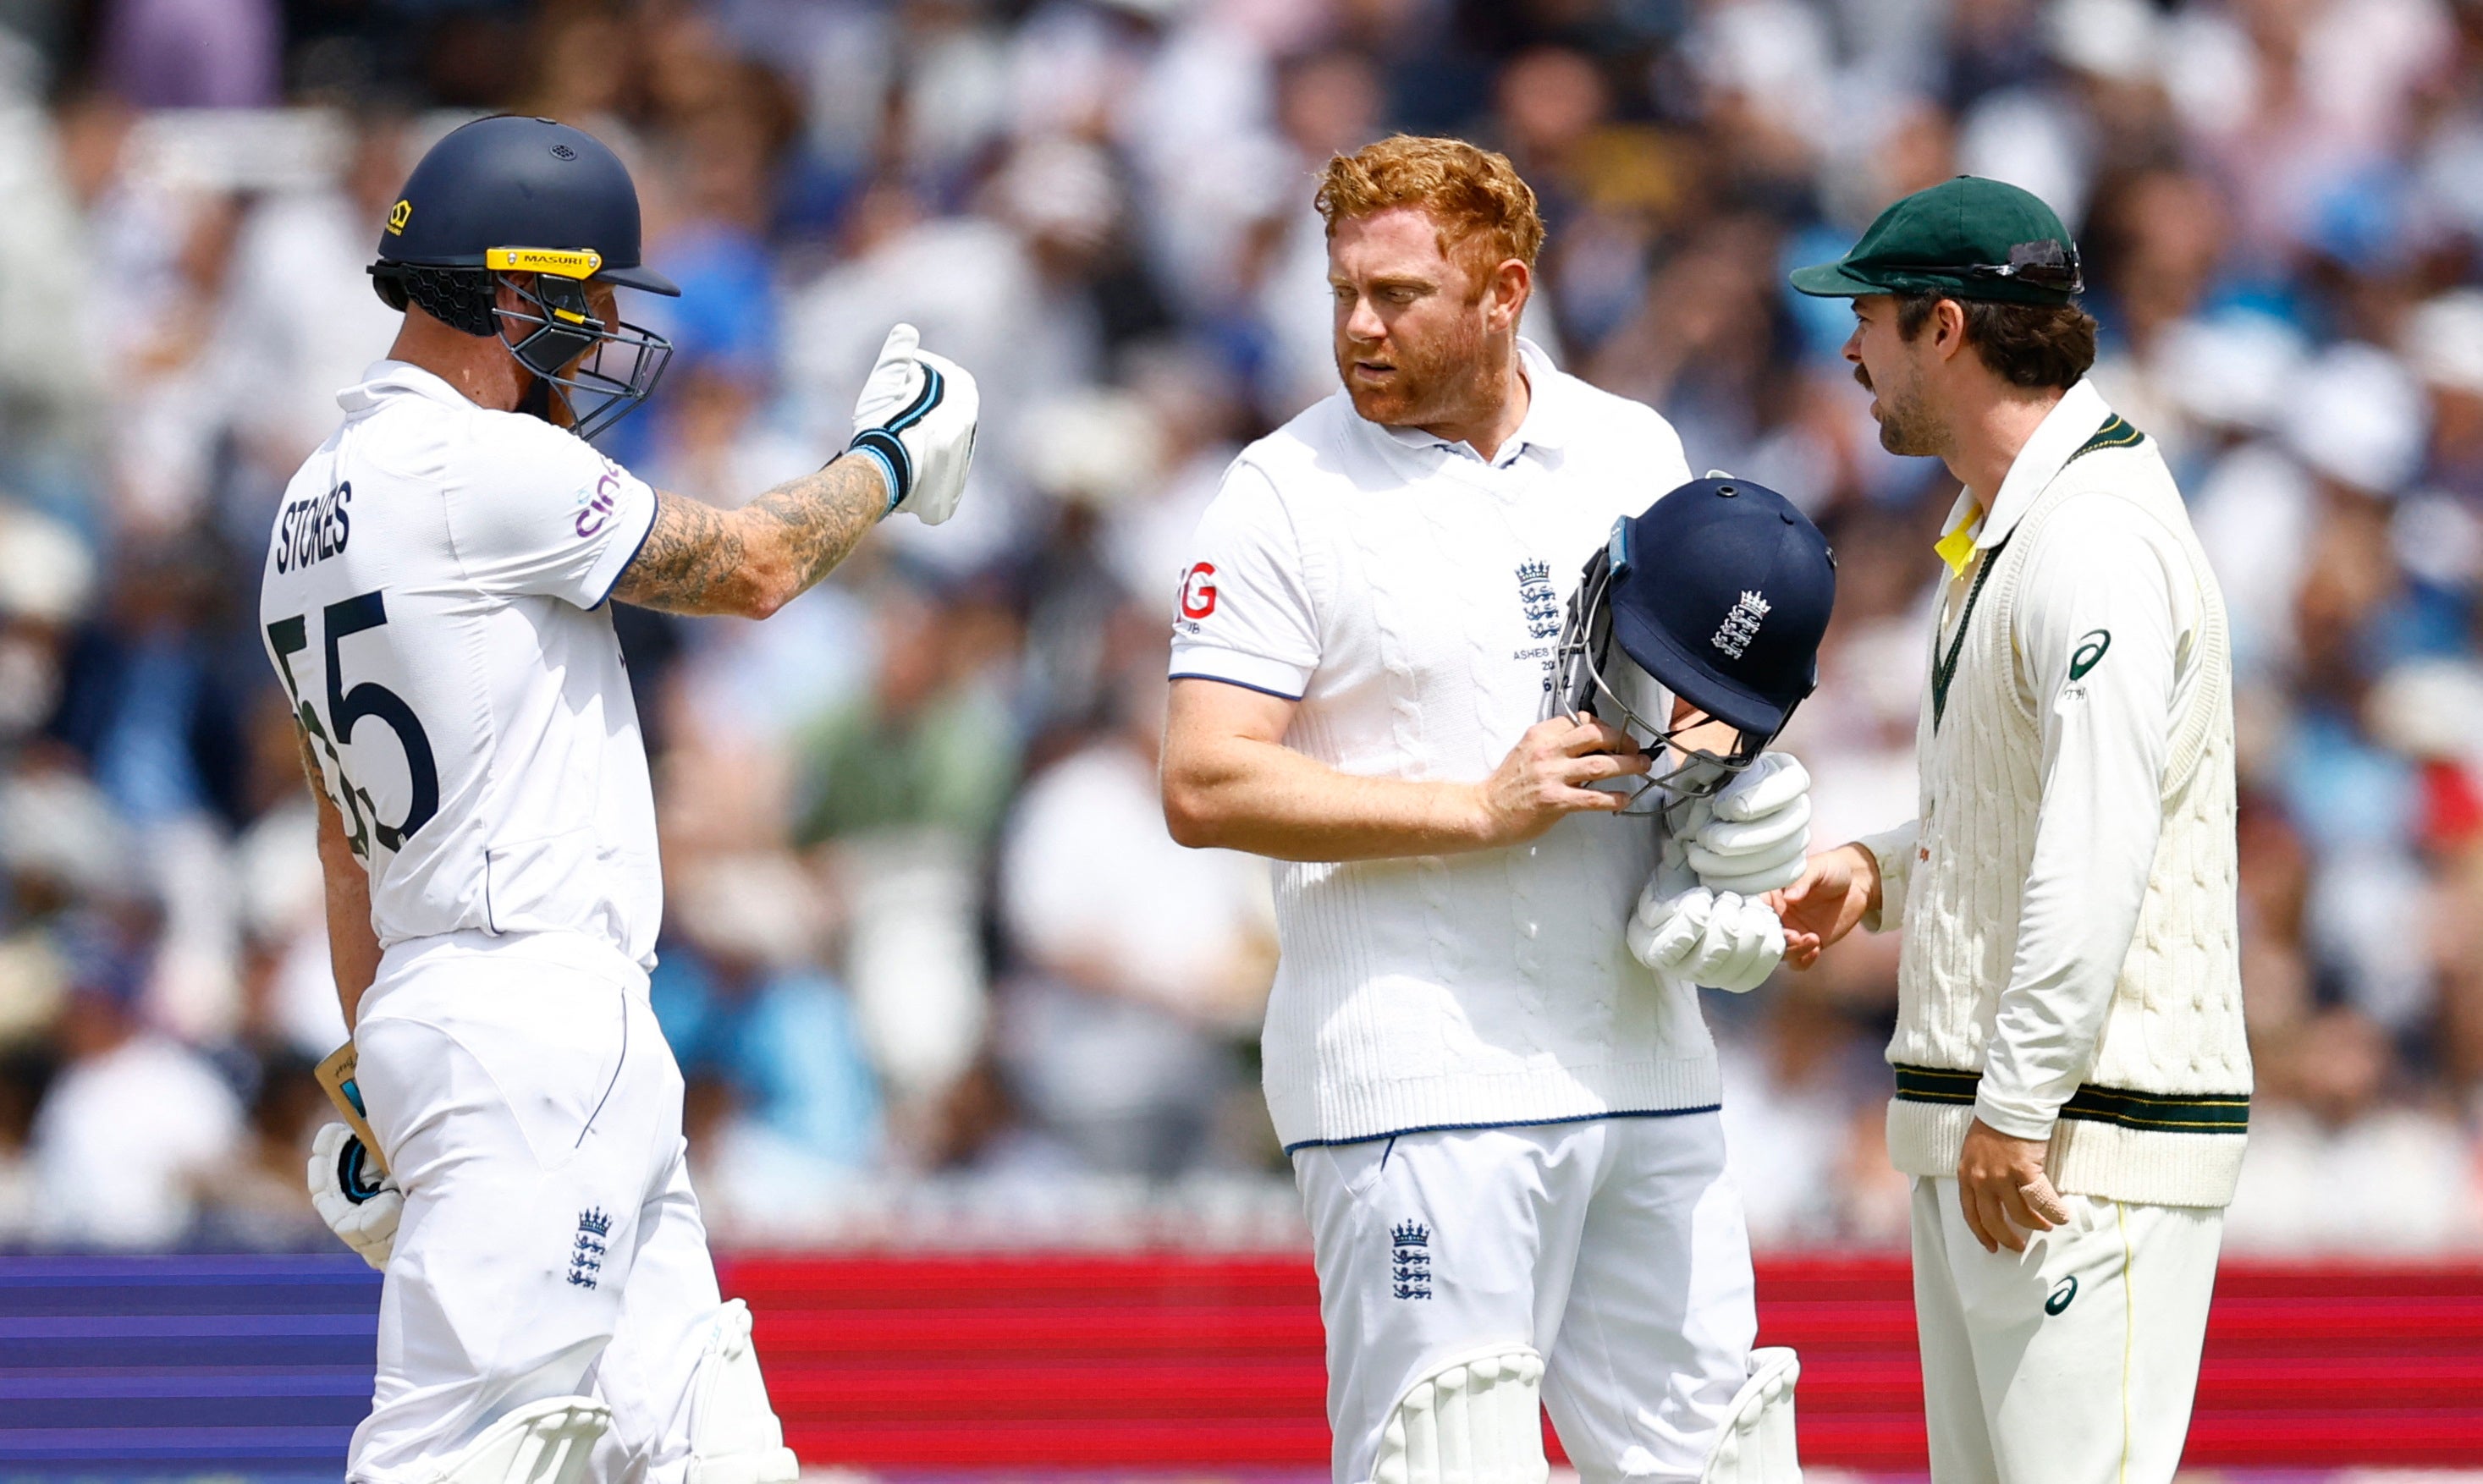 Jonny Bairstow was controversially dismissed in the second Ashes Test